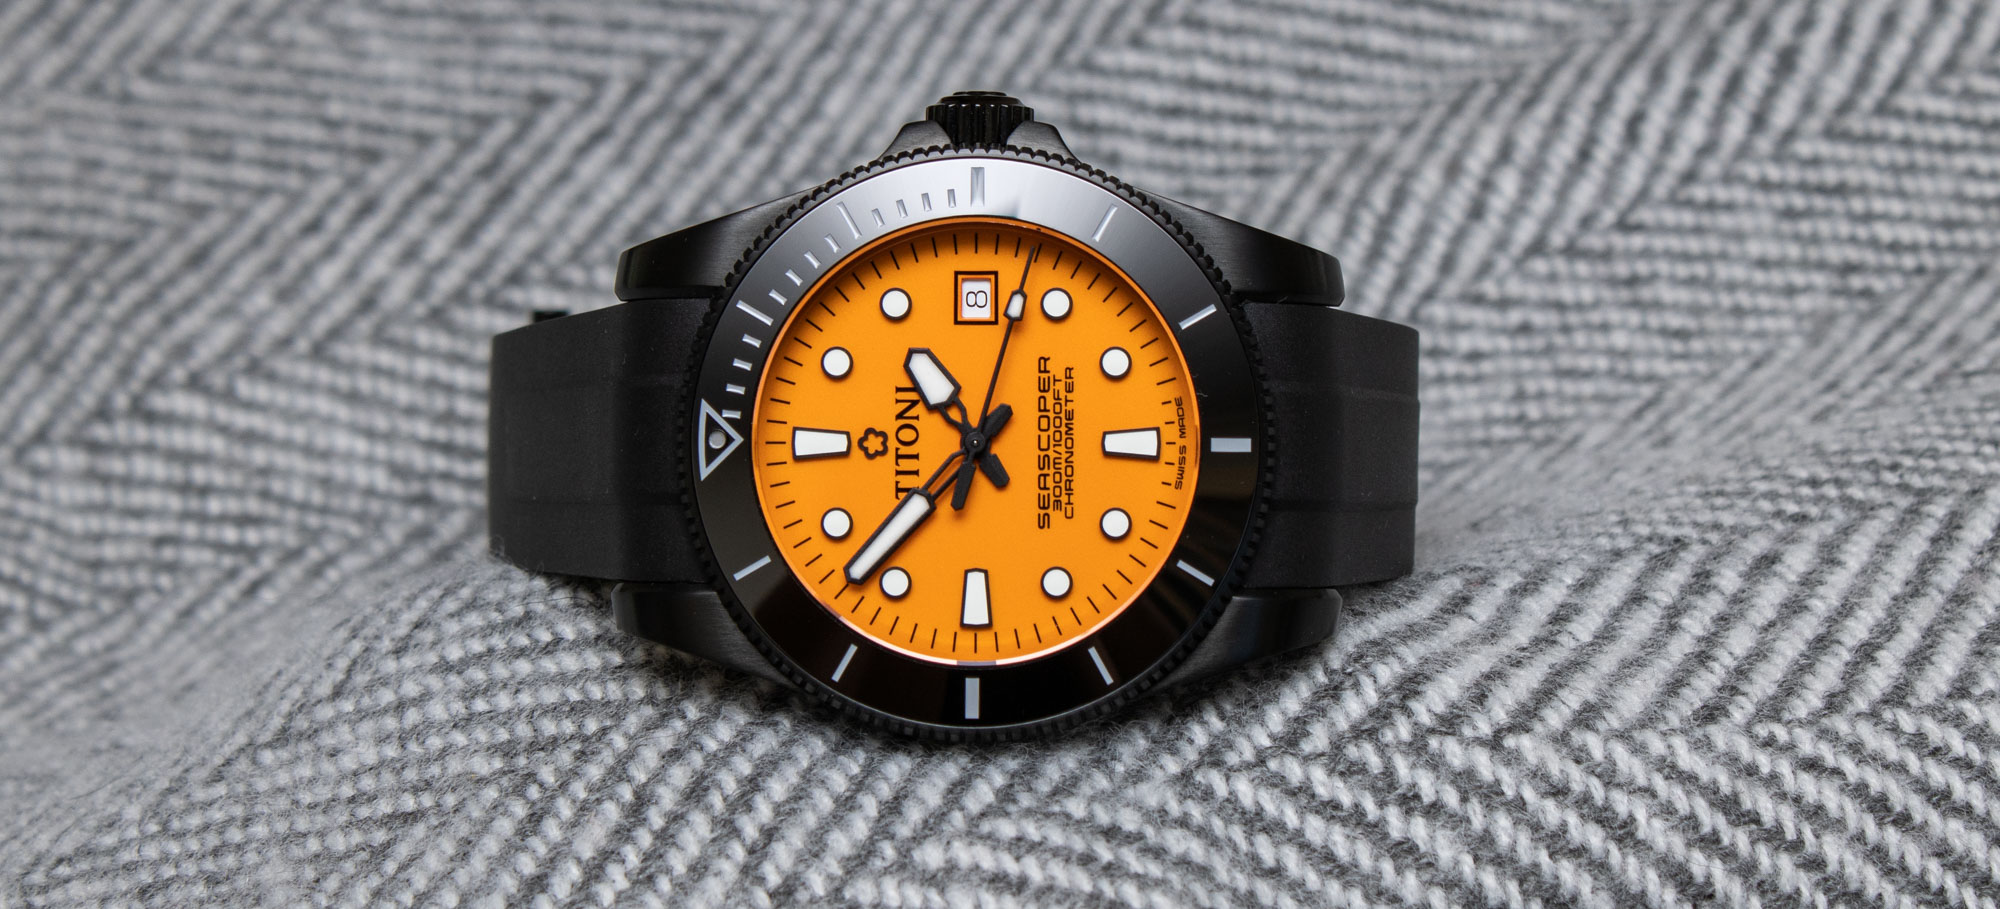 Hands-On Debut: TITONI Seascoper 300 Color Block Limited-Edition Watch |  aBlogtoWatch